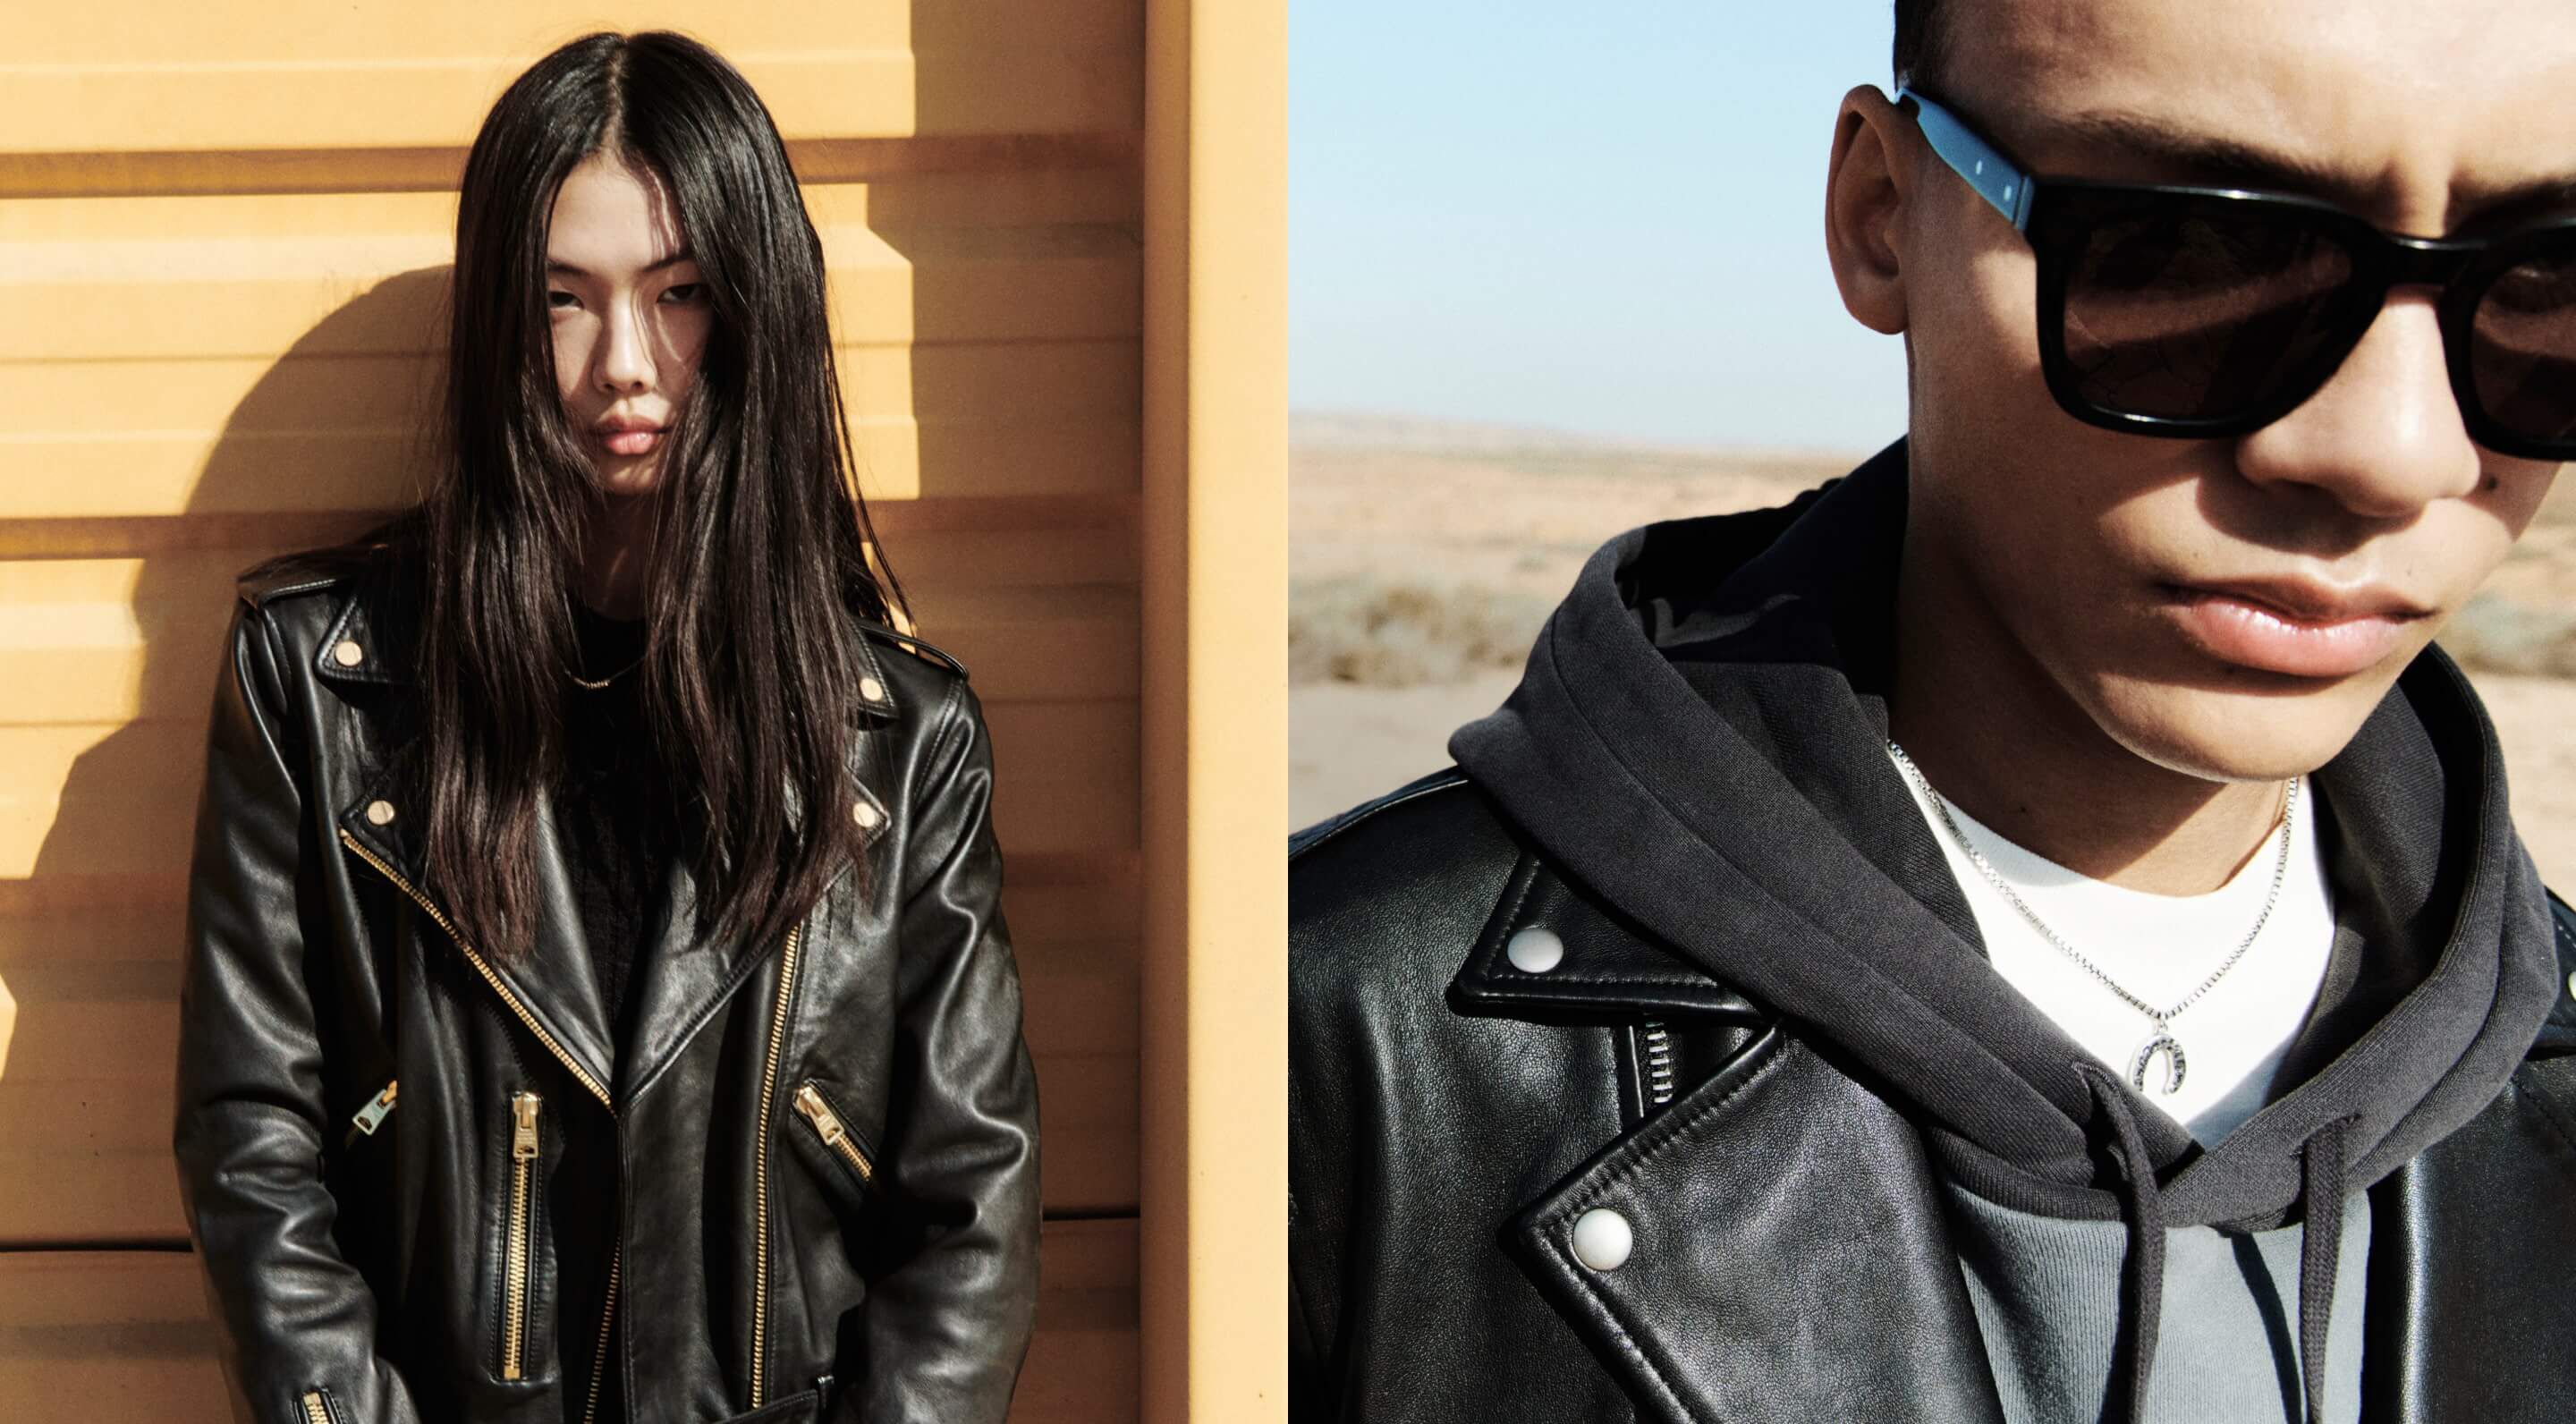 Two portraits of a woman and a man wearing leather jackets from our collection.